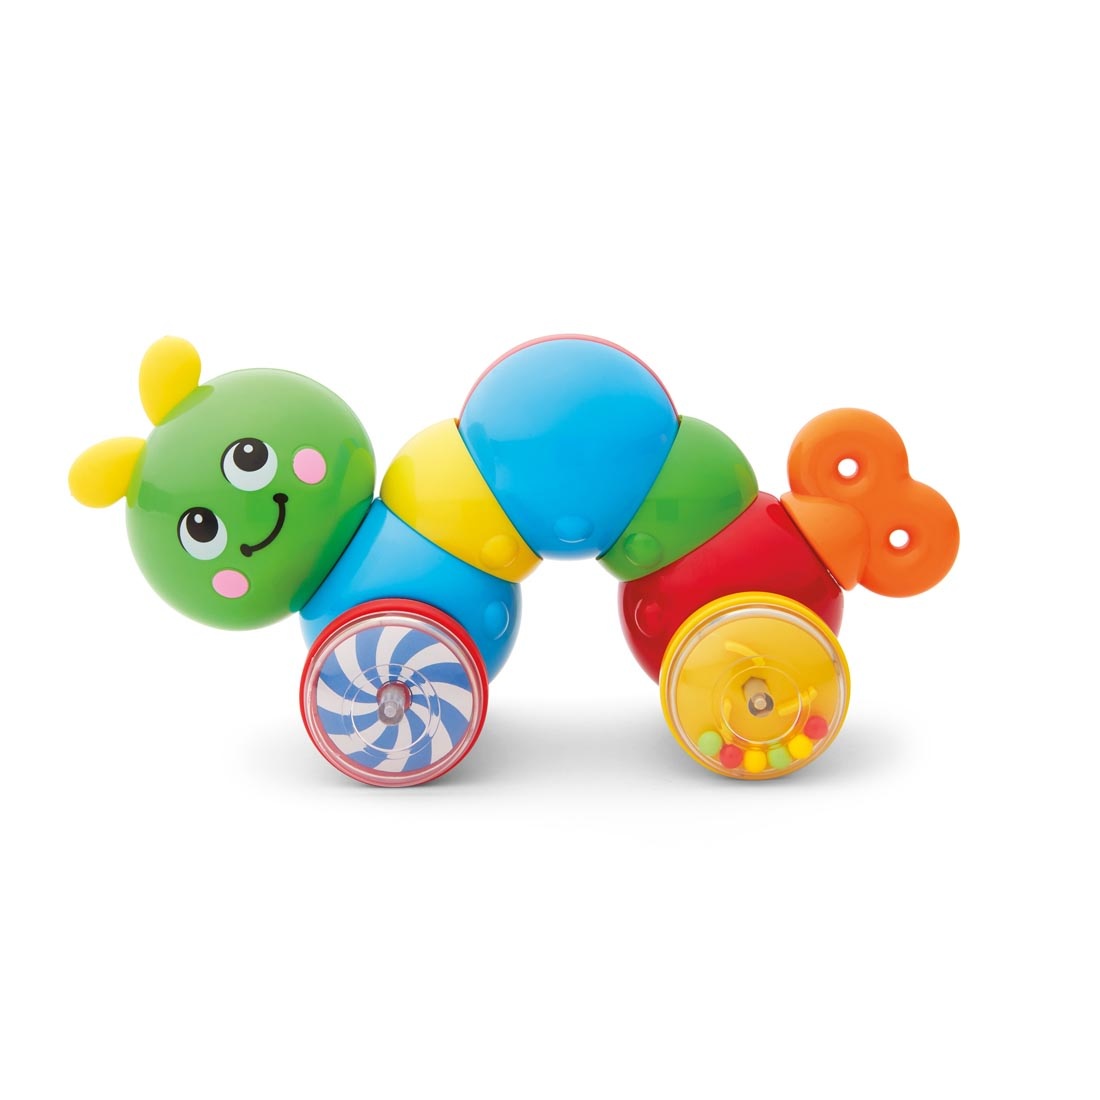 press and go toys